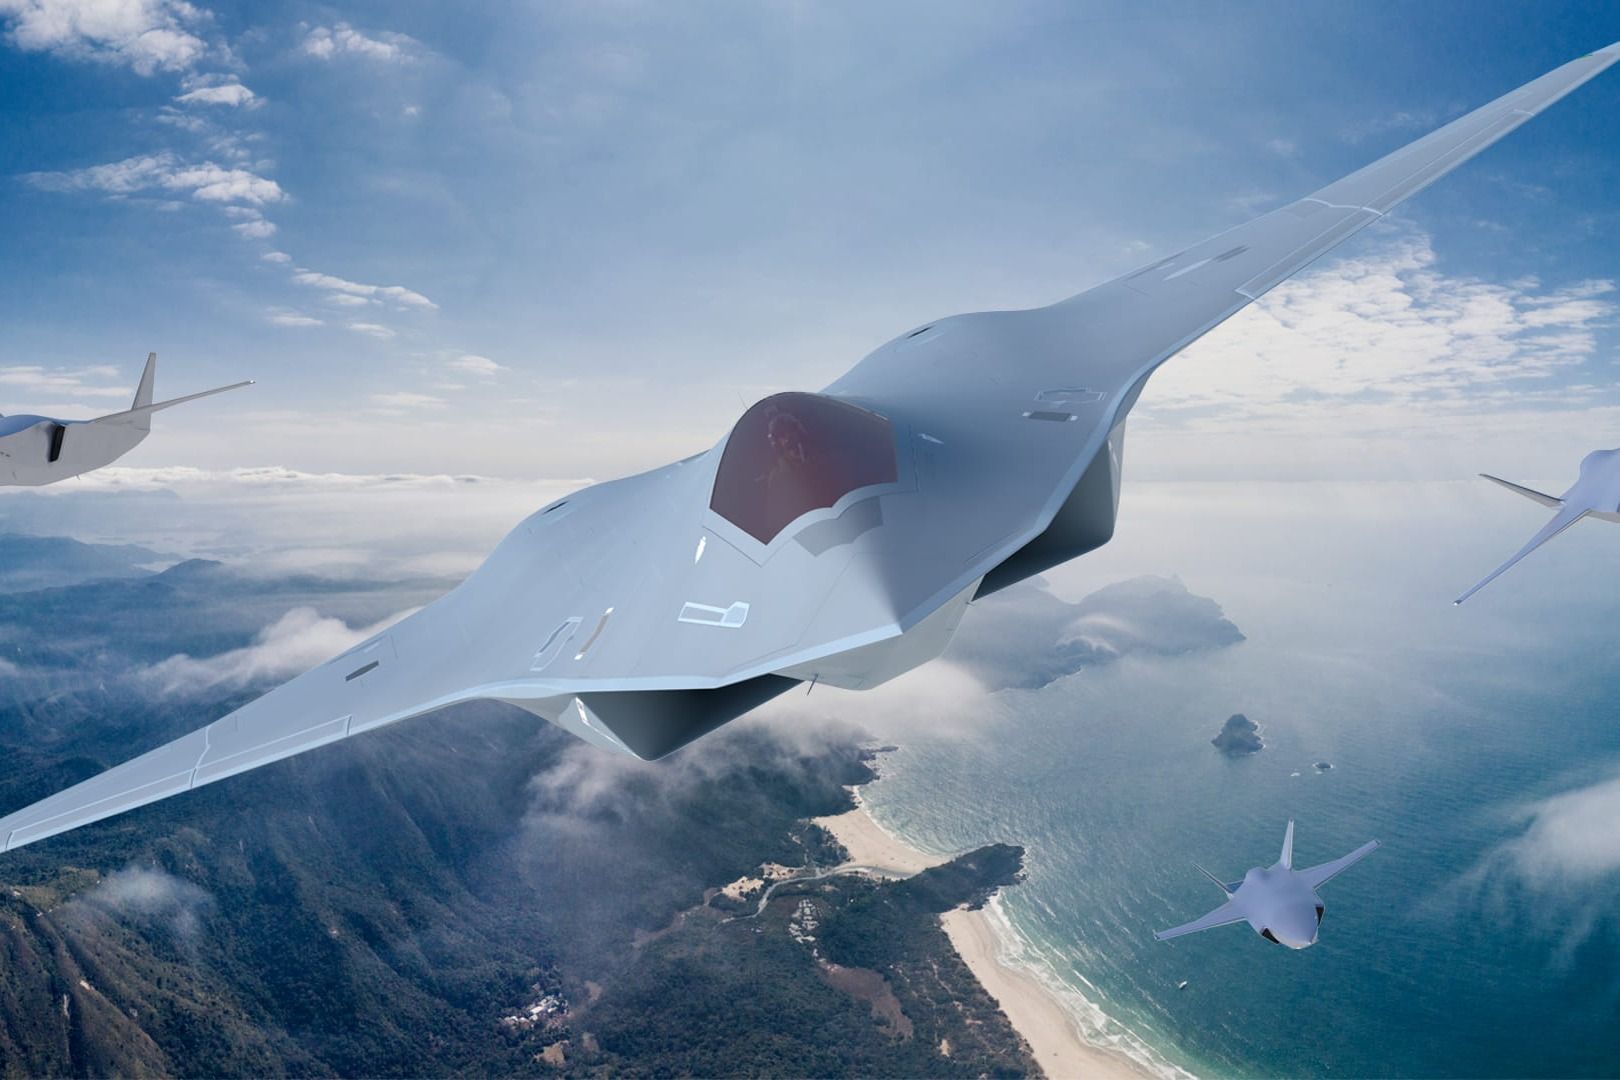 A render of several 6th Generation Fighters flying near a coastal area.